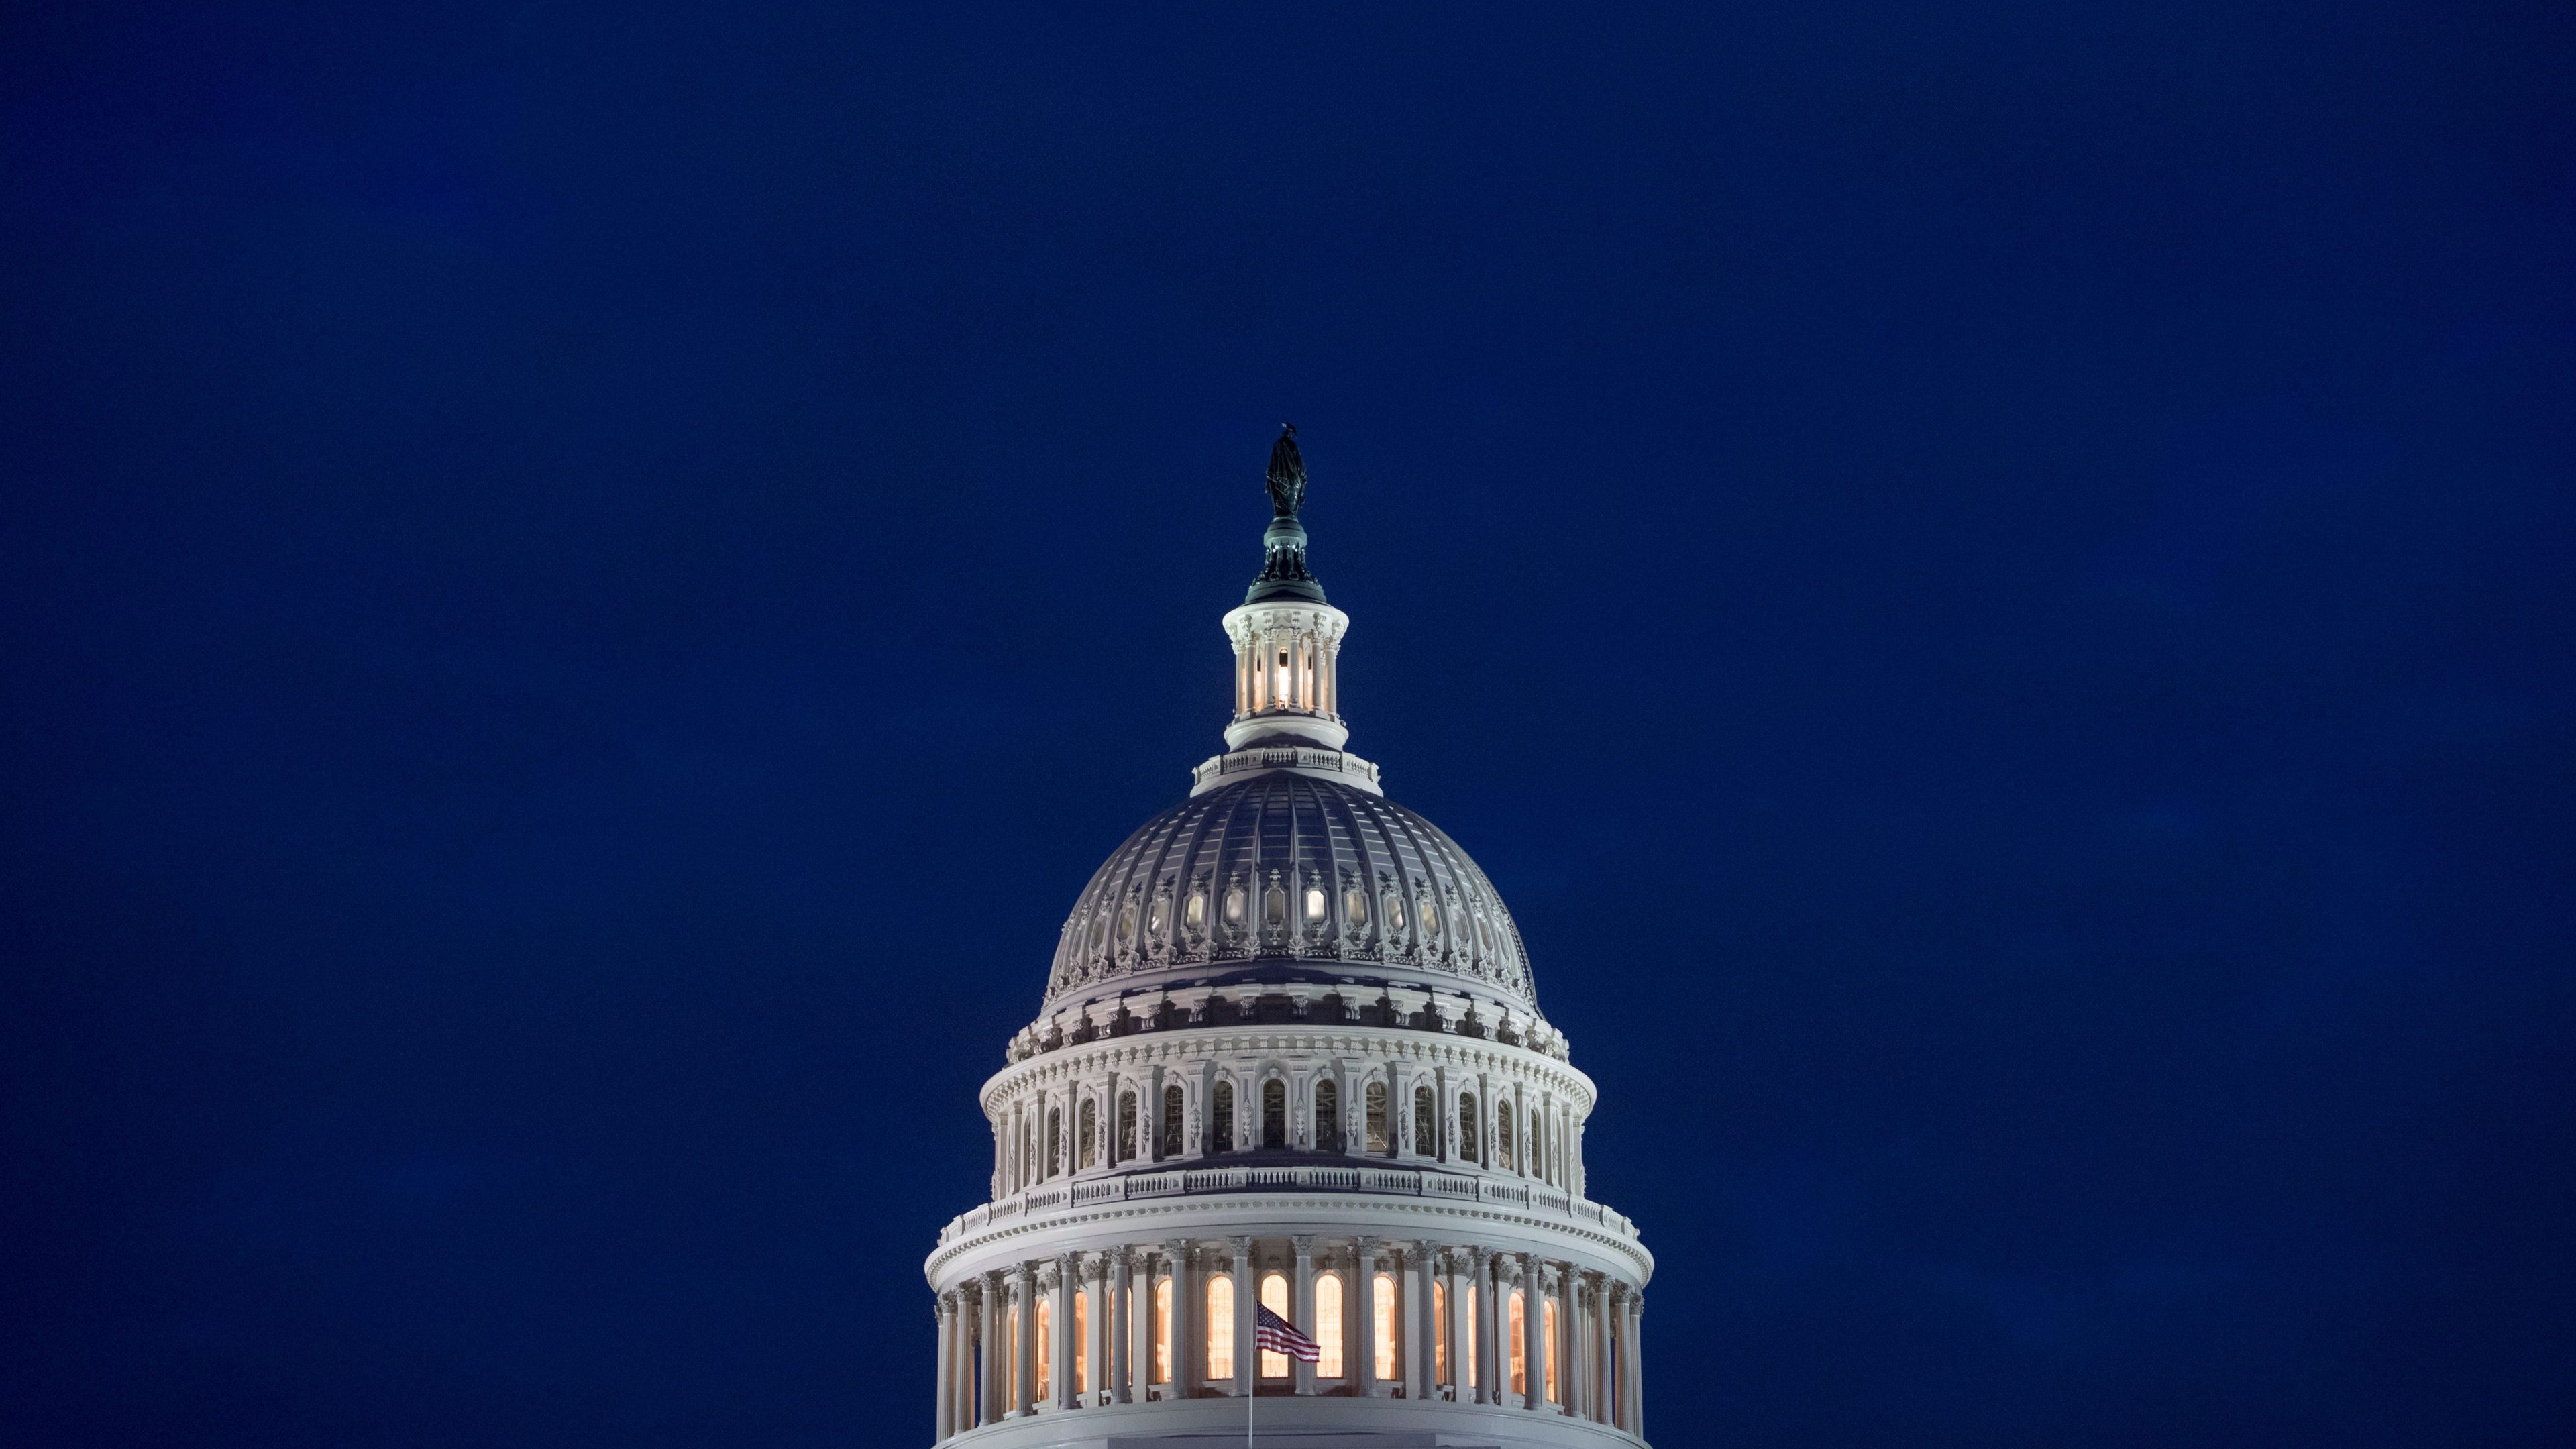 The US Capitol Building is seen at dusk in Washington, DC.